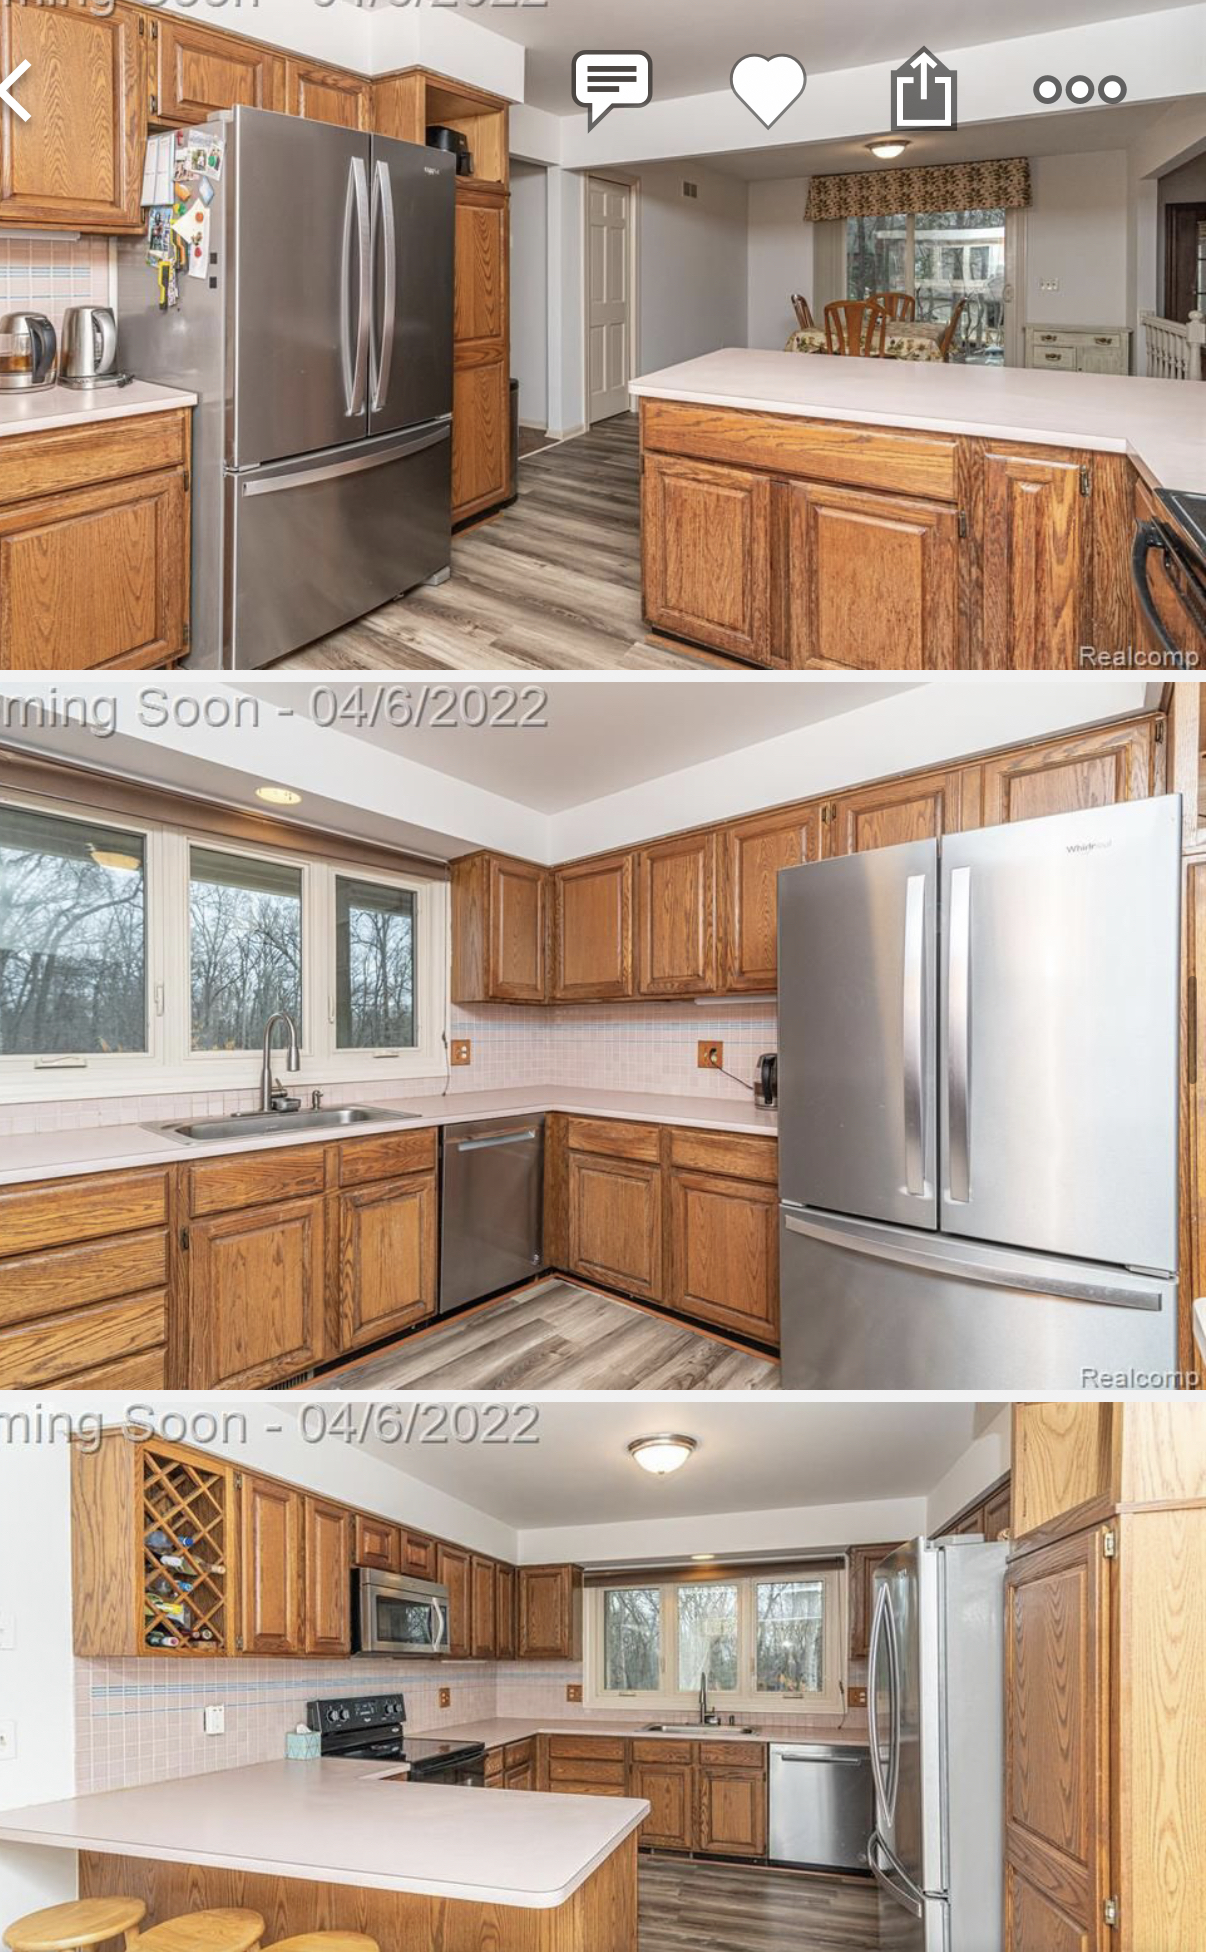 Sharing our kitchen transformation. We did this renovation ourselves using cabinets from Cabinets Express! We love how bright this space is!